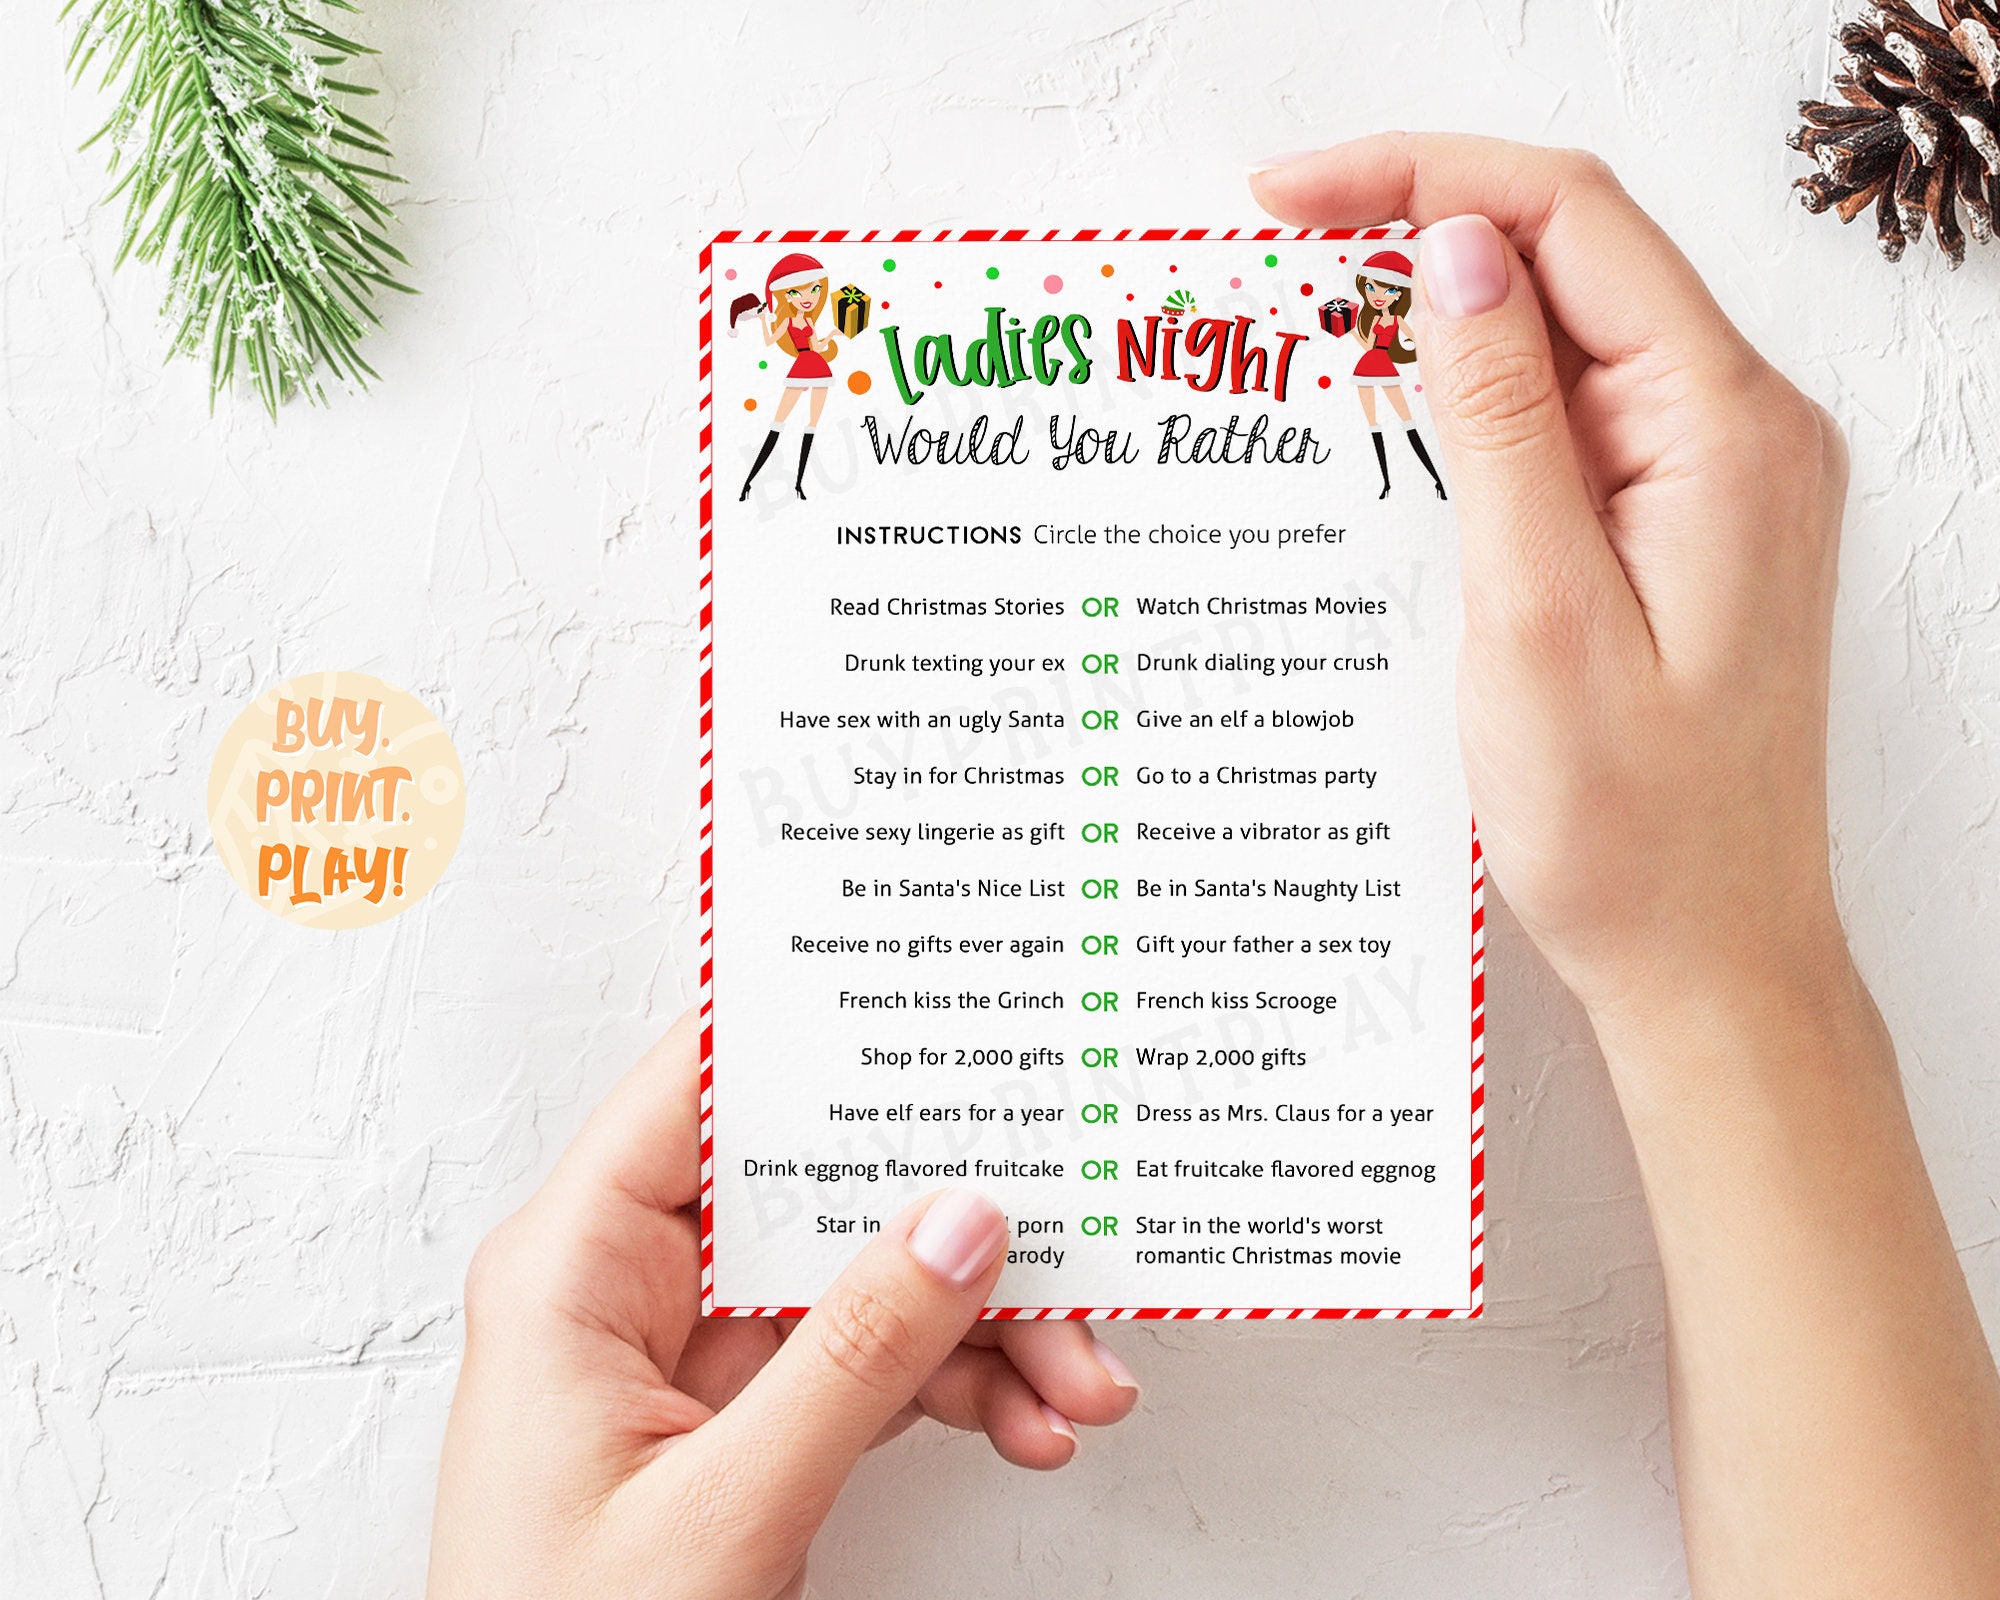 Christmas Drunk Sex - Christmas Would You Rather Ladies Night Friendsmas Games - Etsy